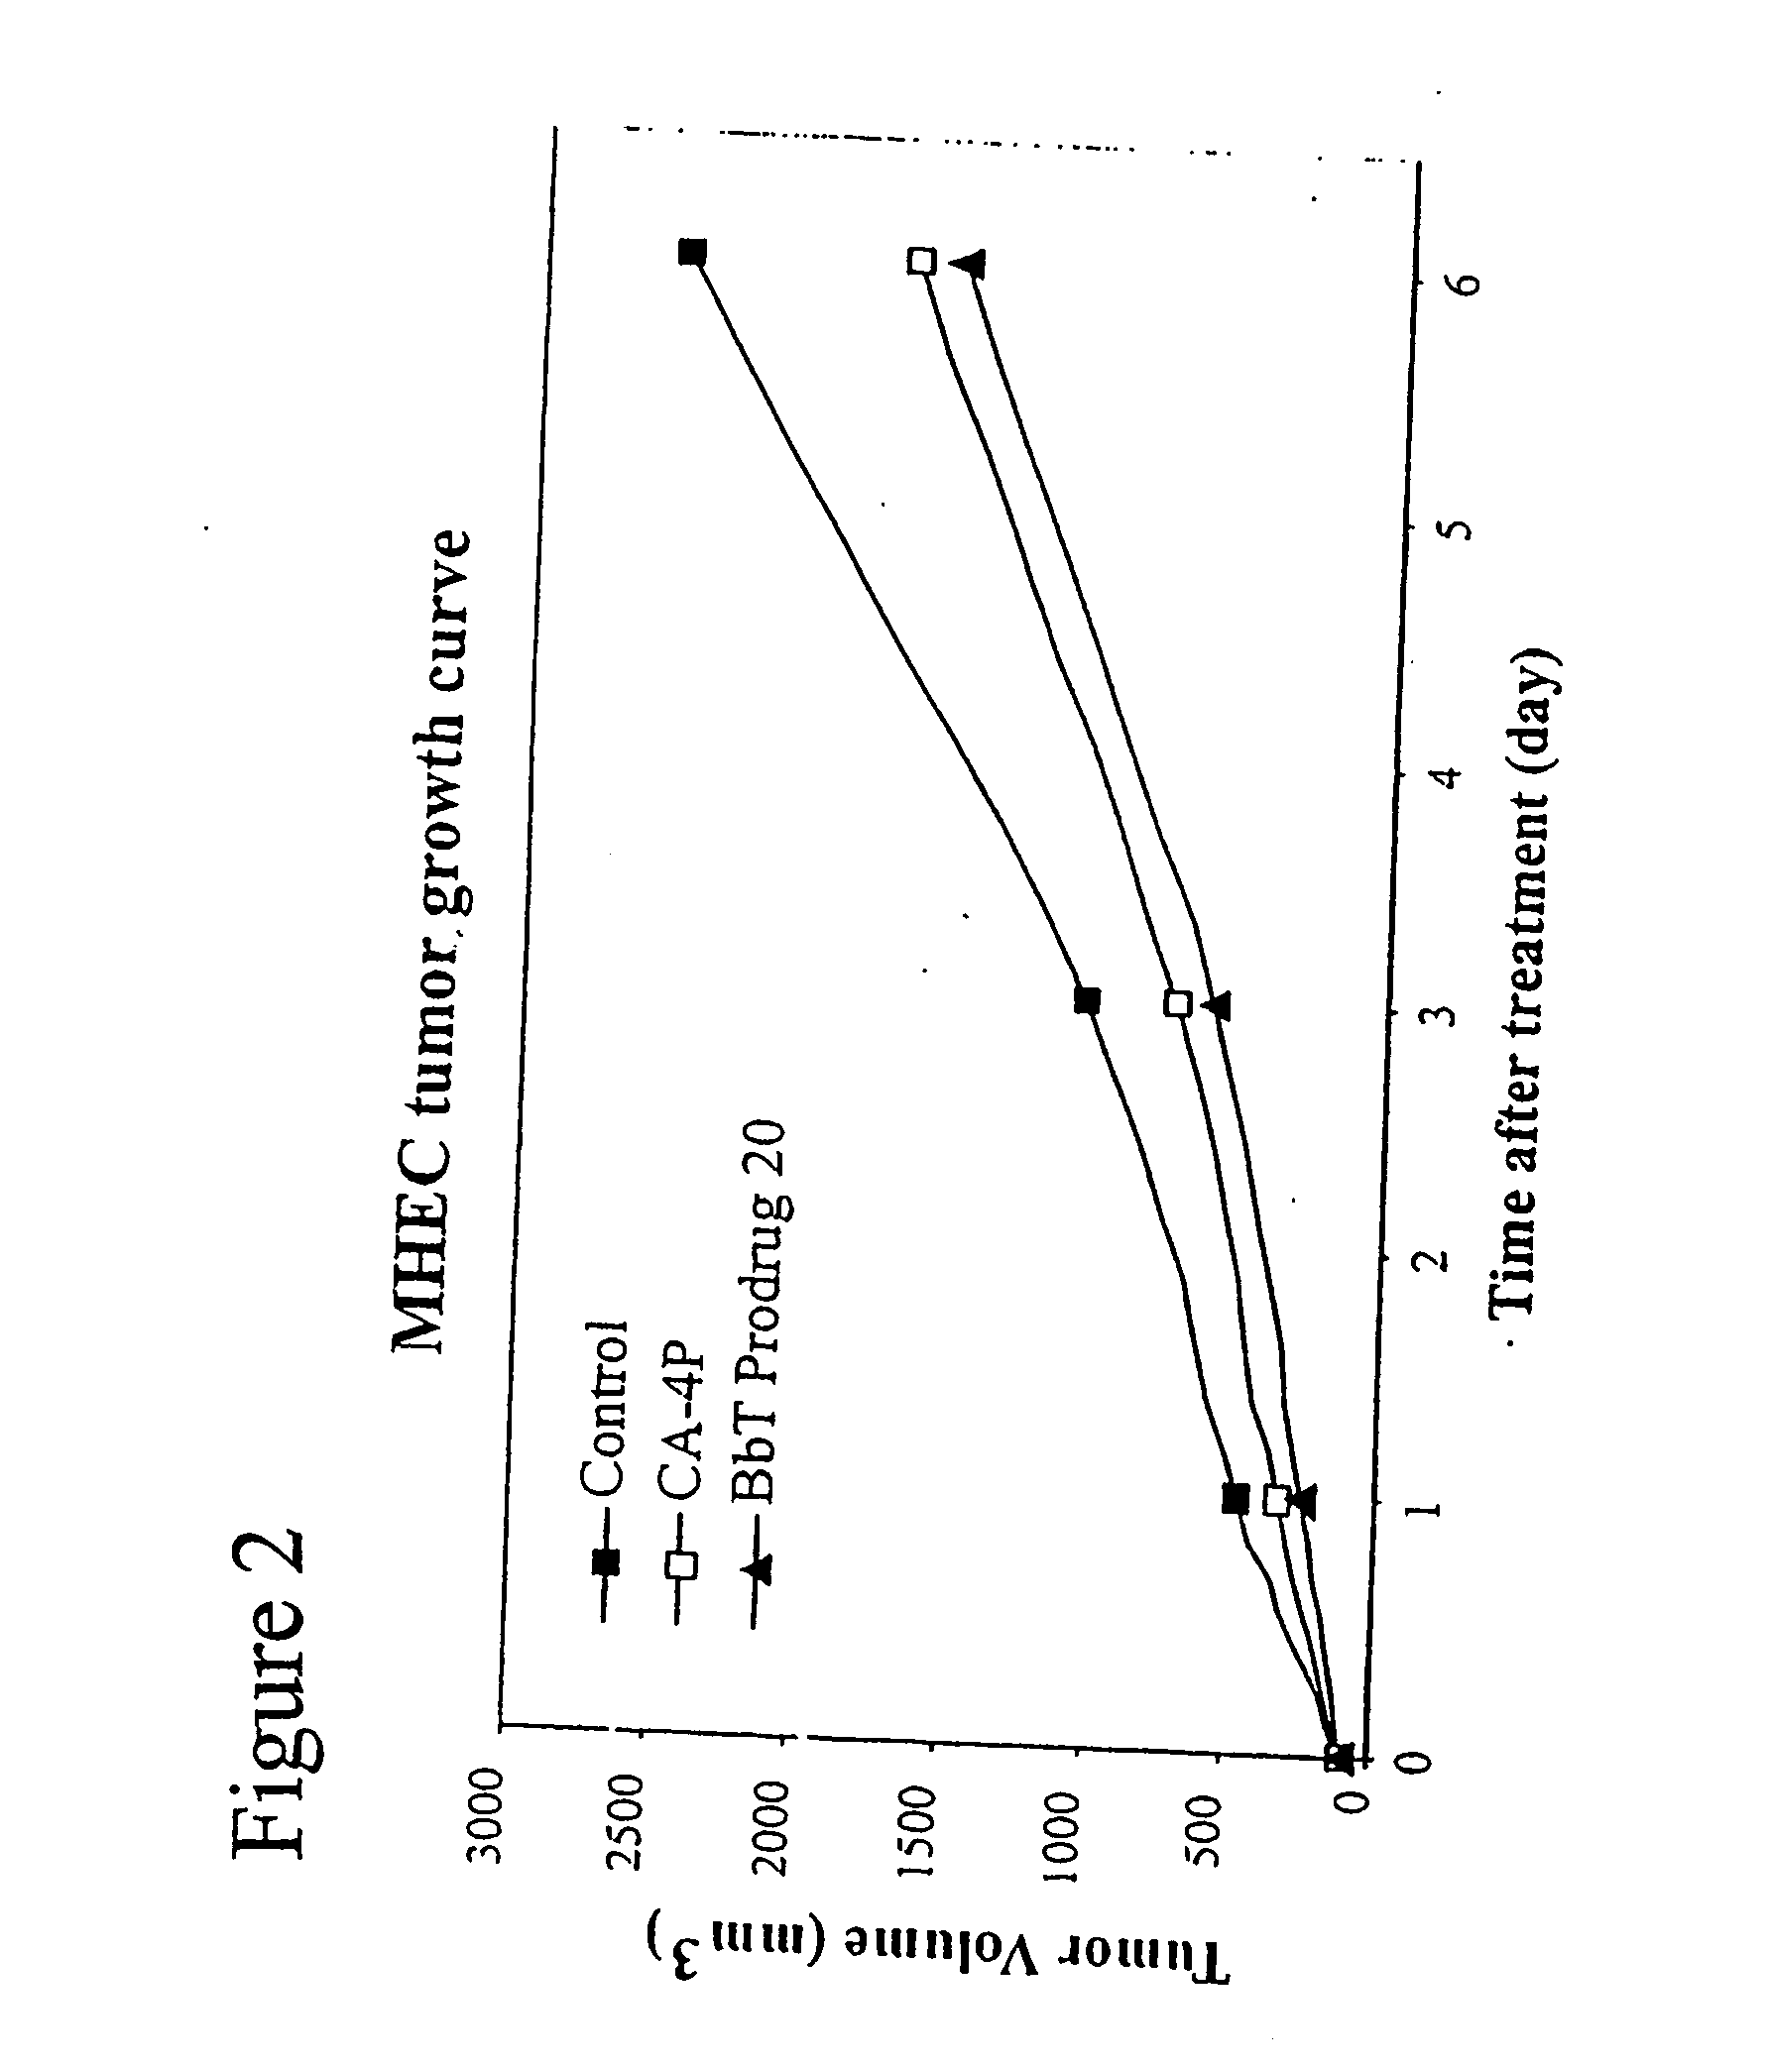 Indole-containing compounds with anti-tubulin and vascular targeting activity